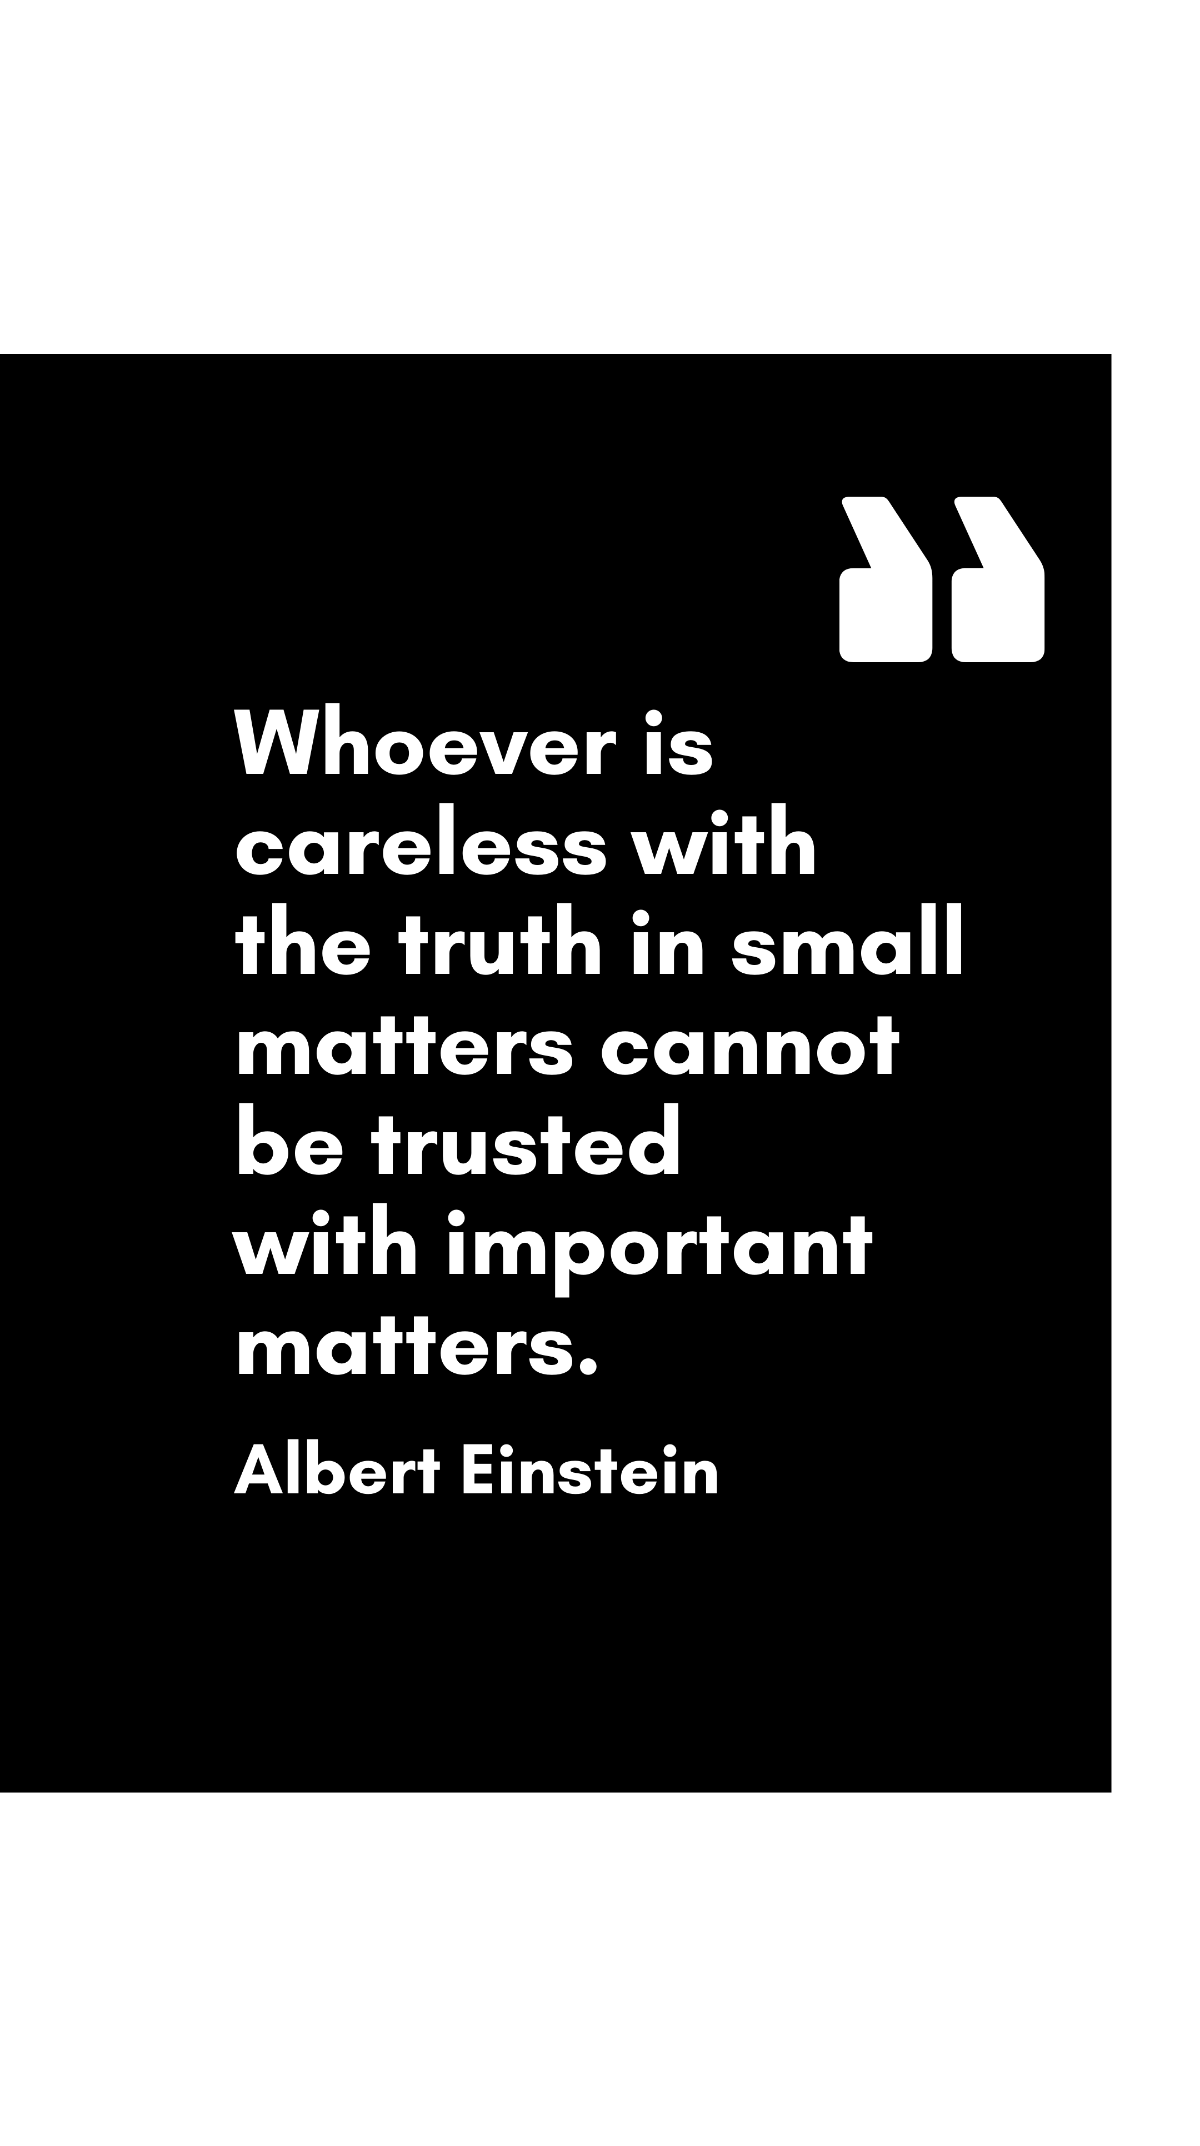 Albert Einstein - Whoever is careless with the truth in small matters cannot be trusted with important matters.